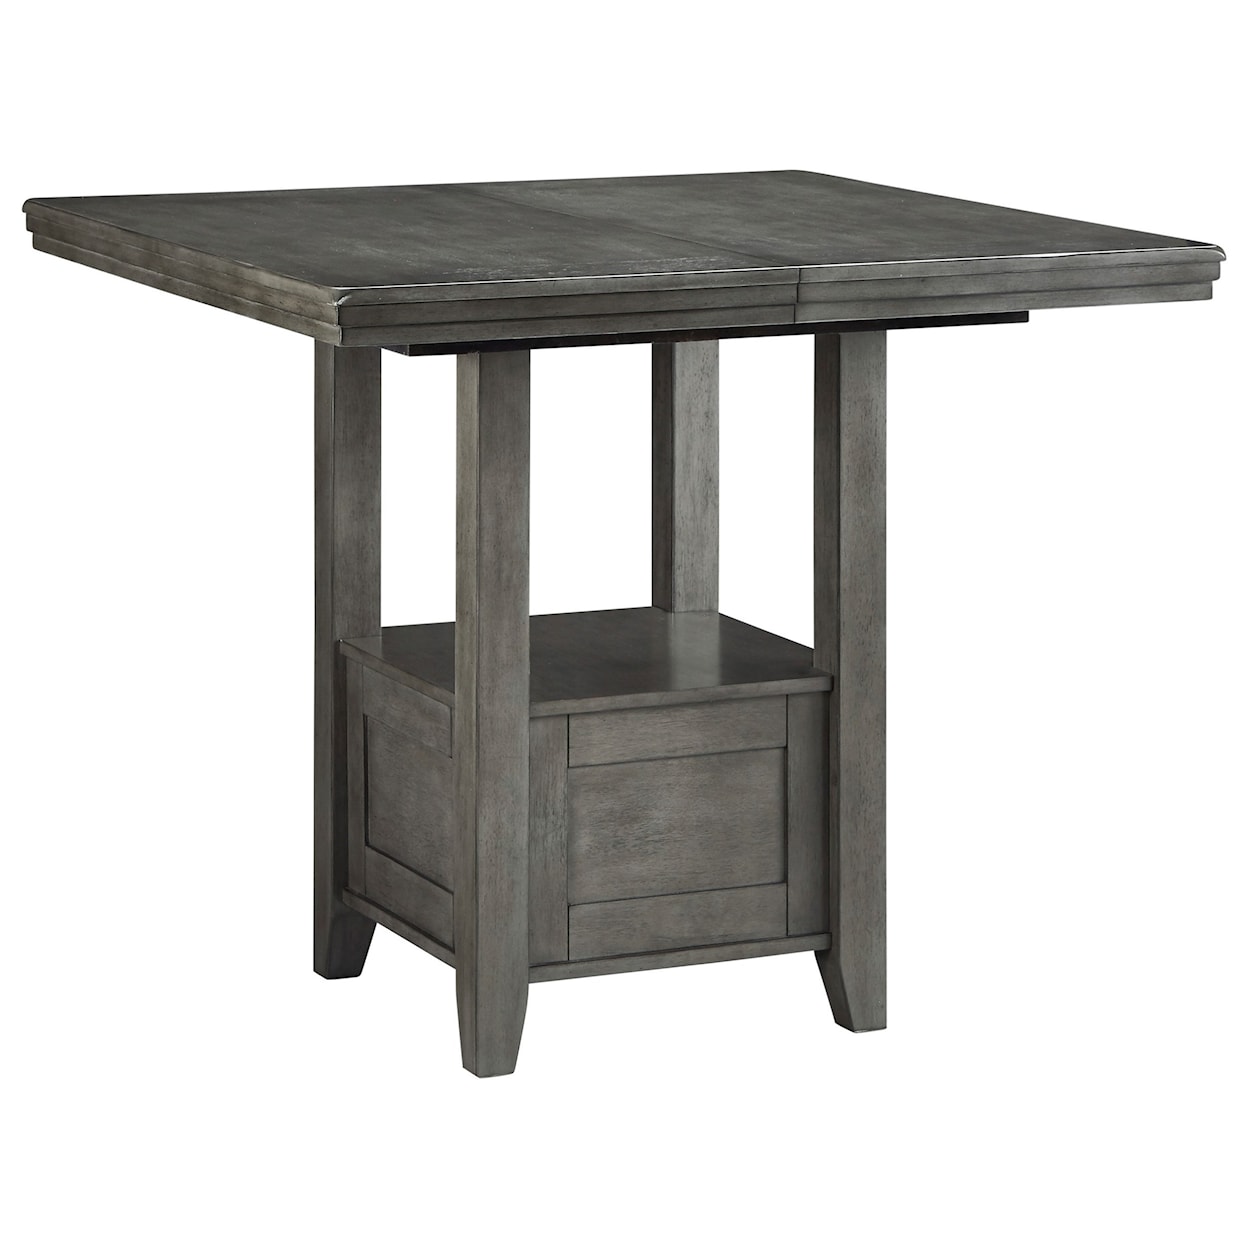 Signature Design by Ashley Hallanden - duplicate Counter Height Dining Table